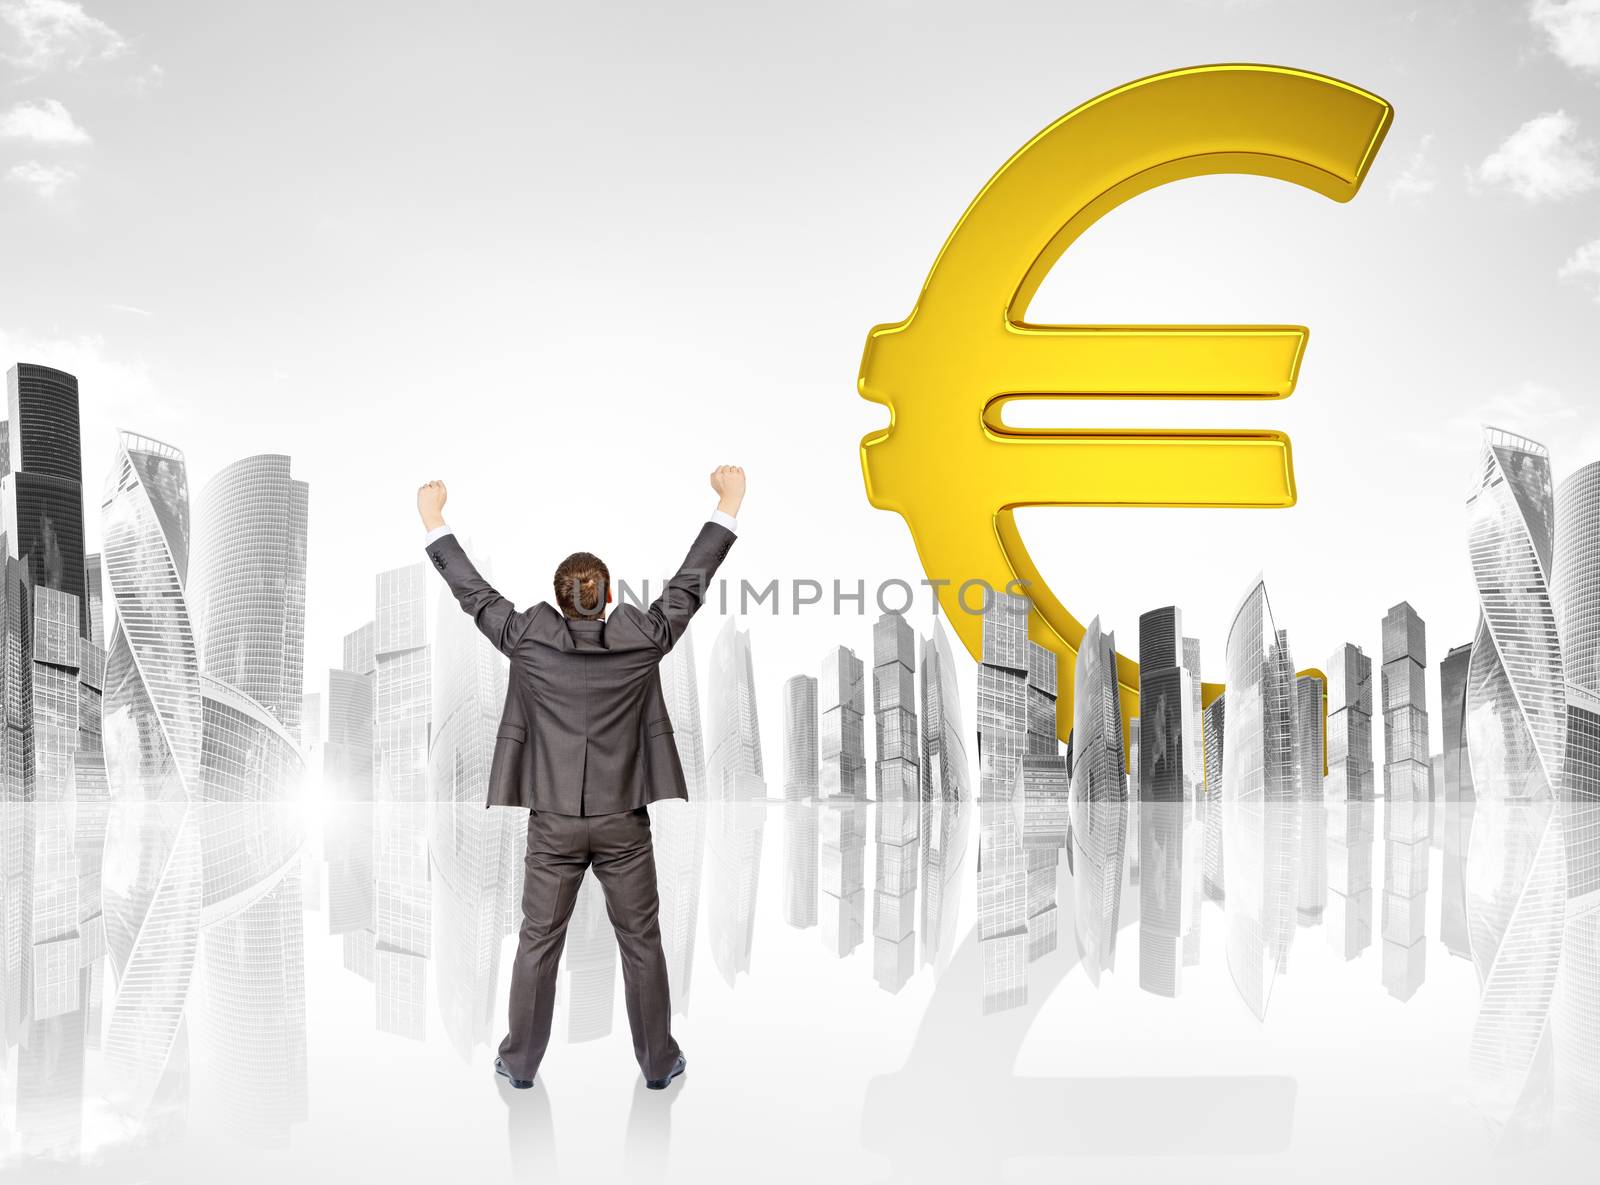 Businessman with spread arms in front of big euro sign